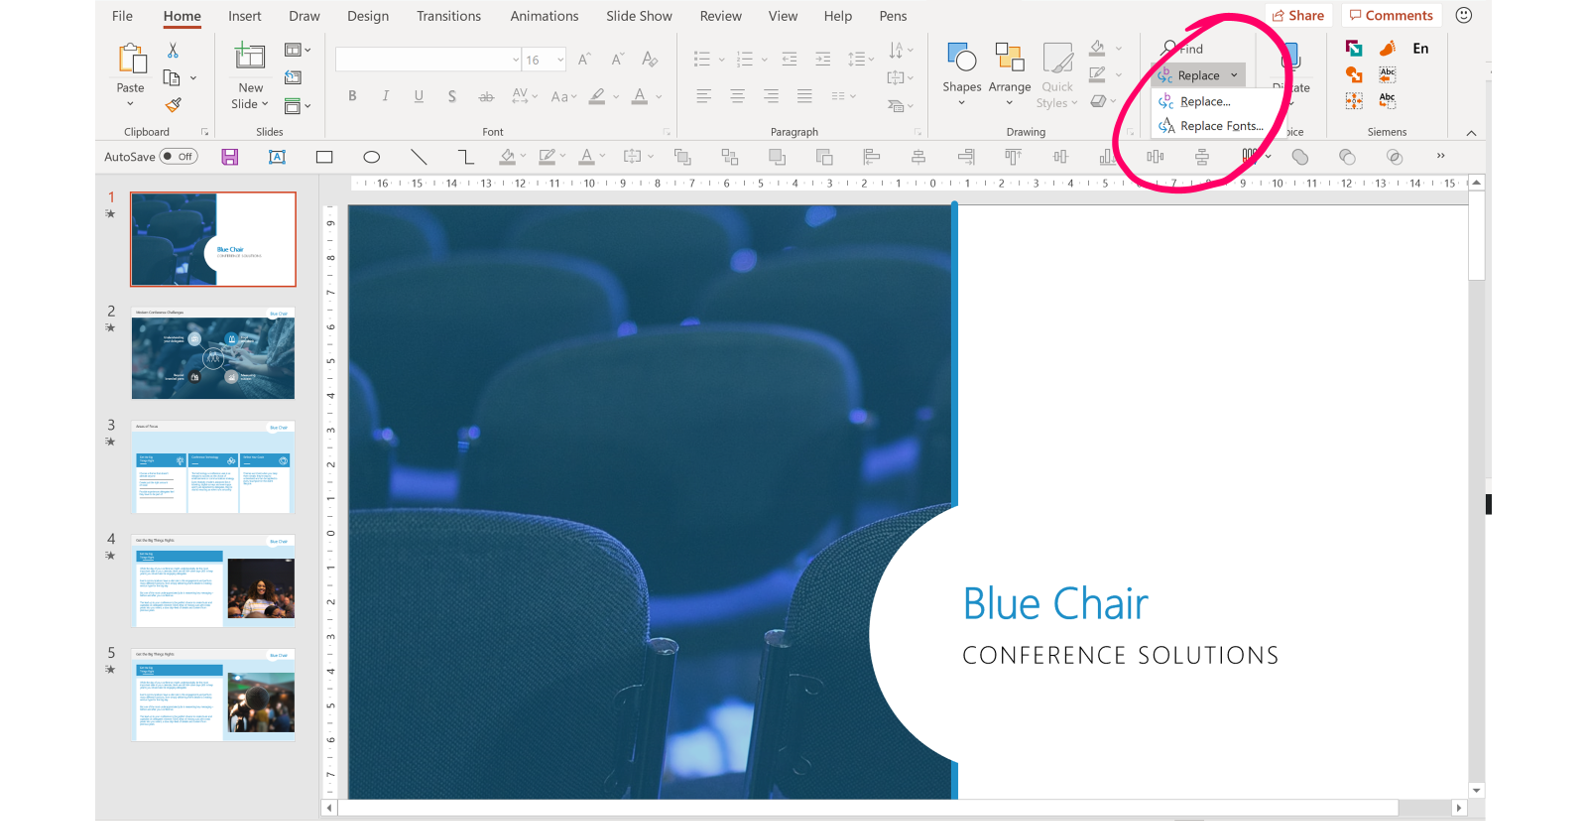 embed font in powerpoint for mac